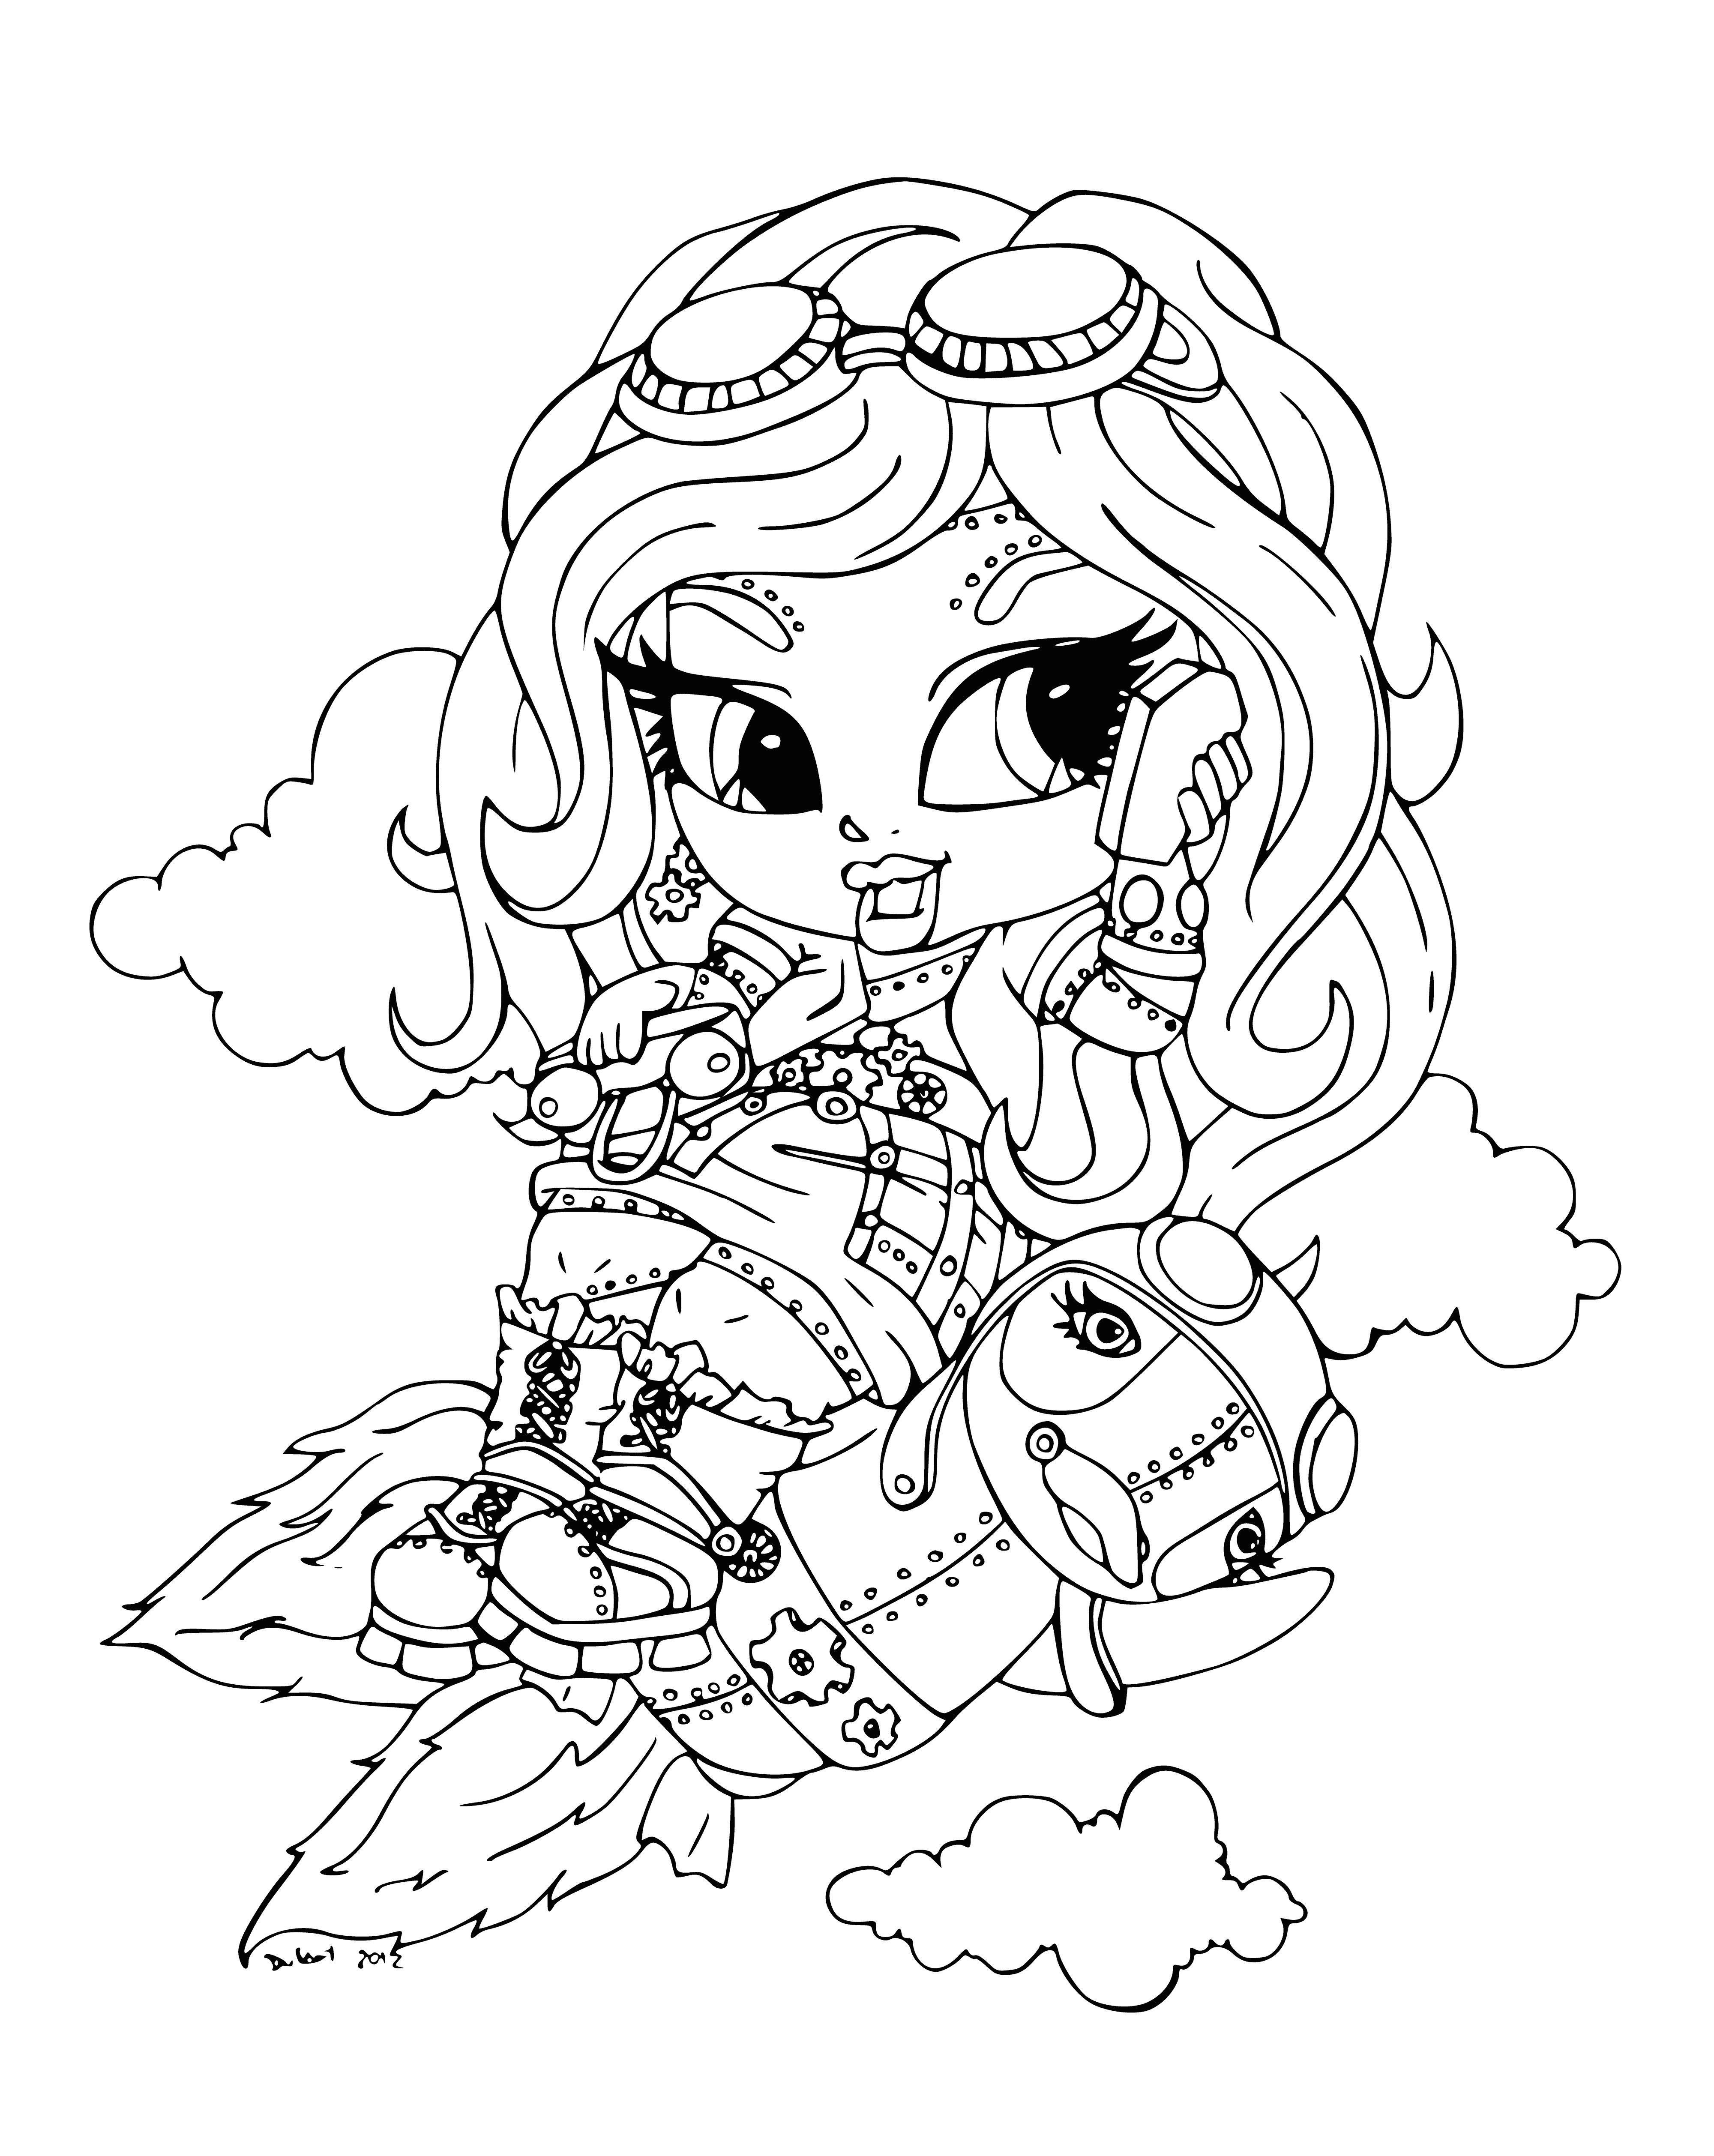 Robekka Steam with a pet coloring page